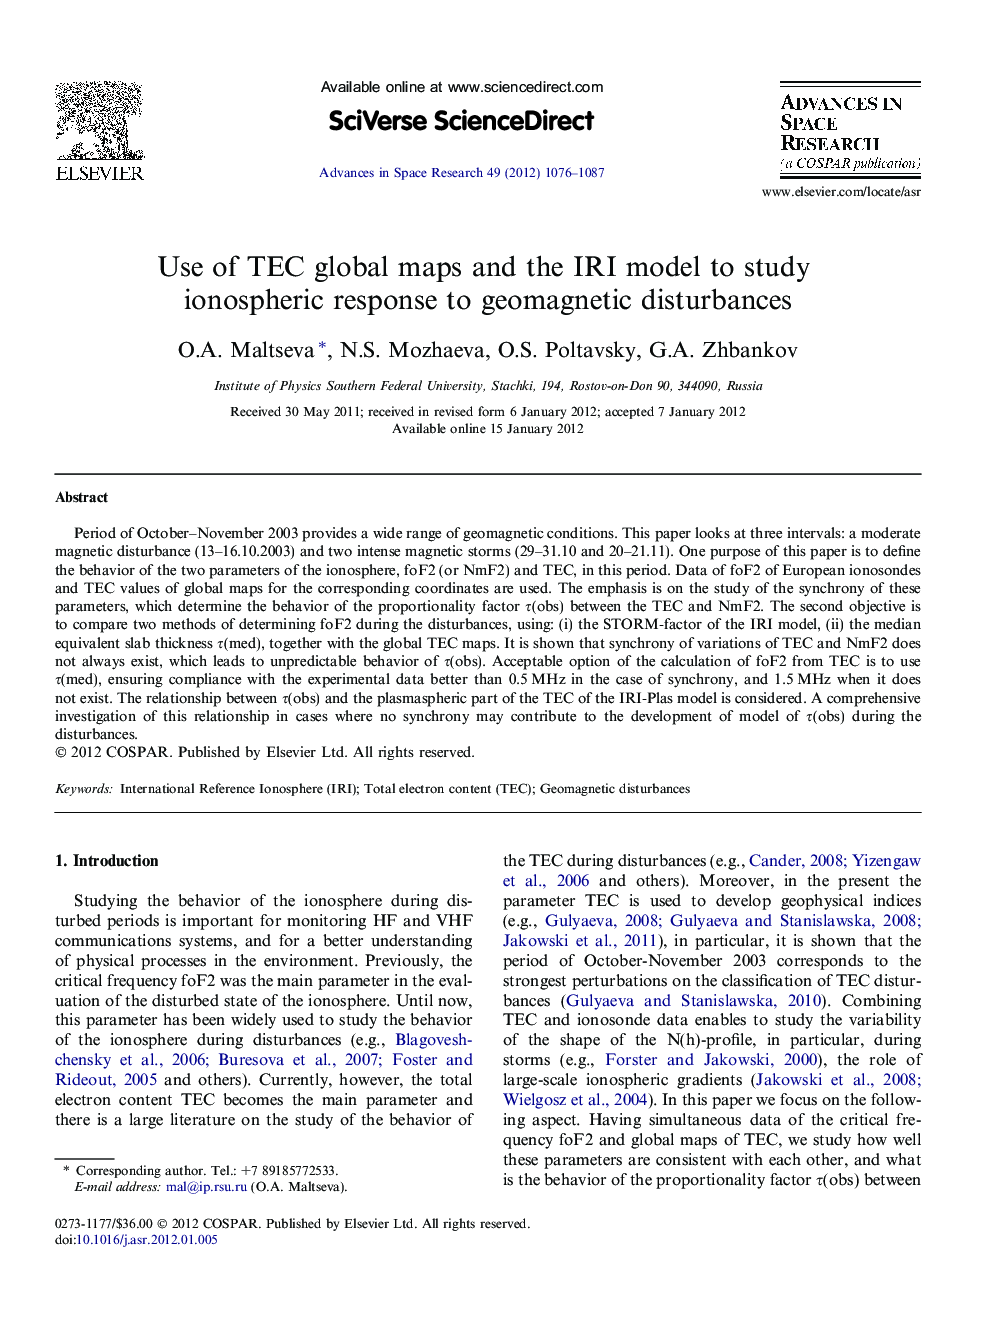 Use of TEC global maps and the IRI model to study ionospheric response to geomagnetic disturbances